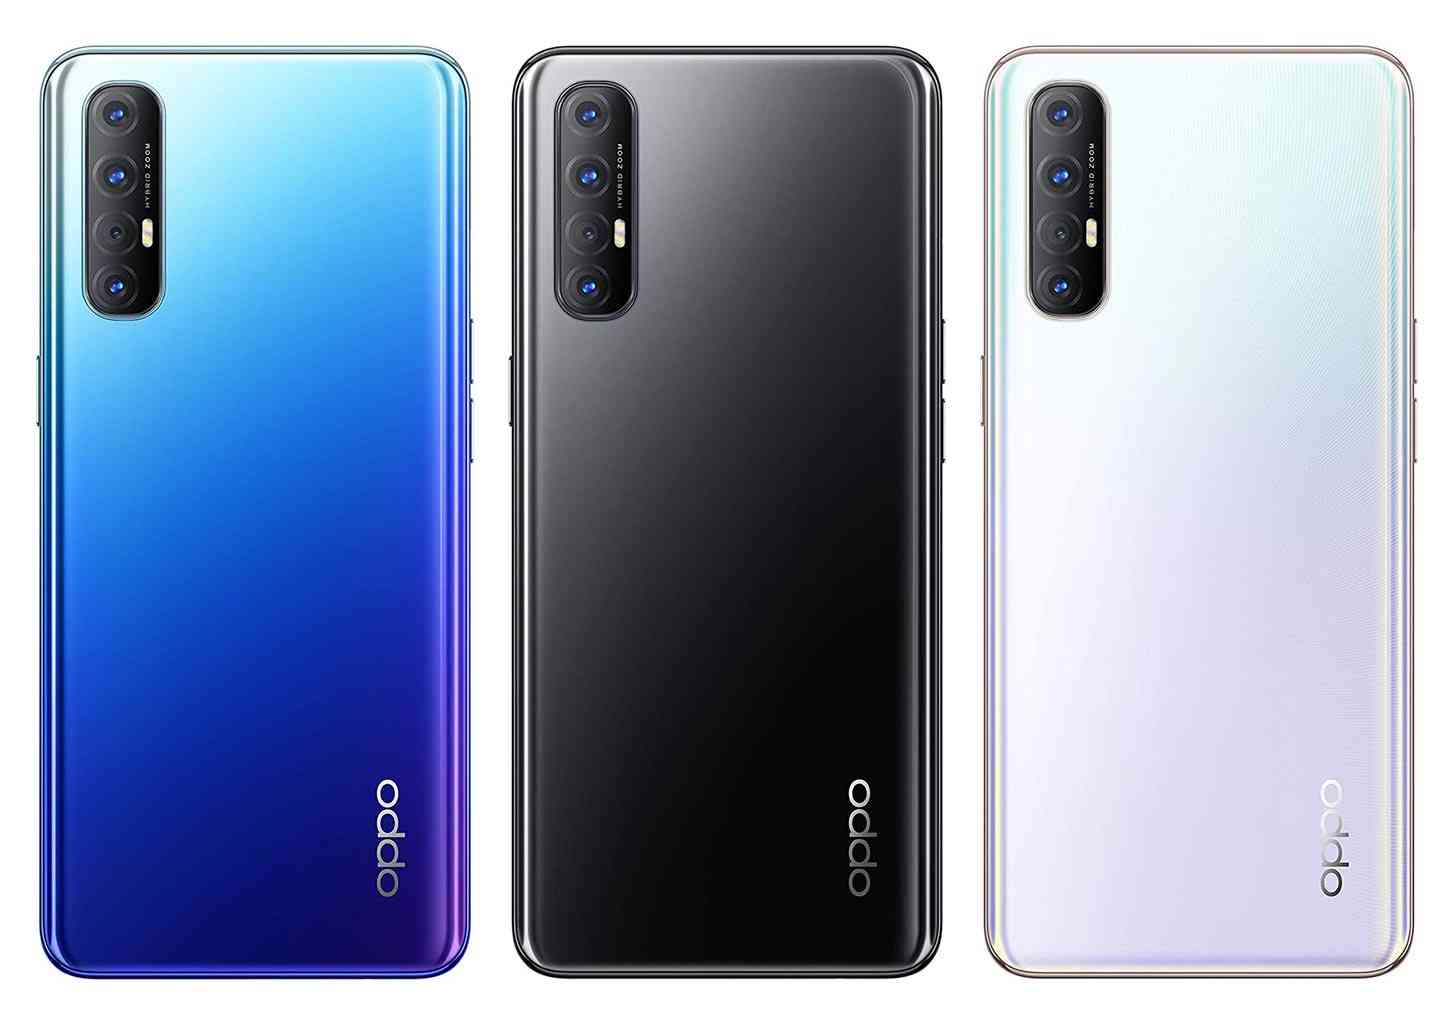 Oppo Reno 3 Pro launches in India with six cameras, including 44MP